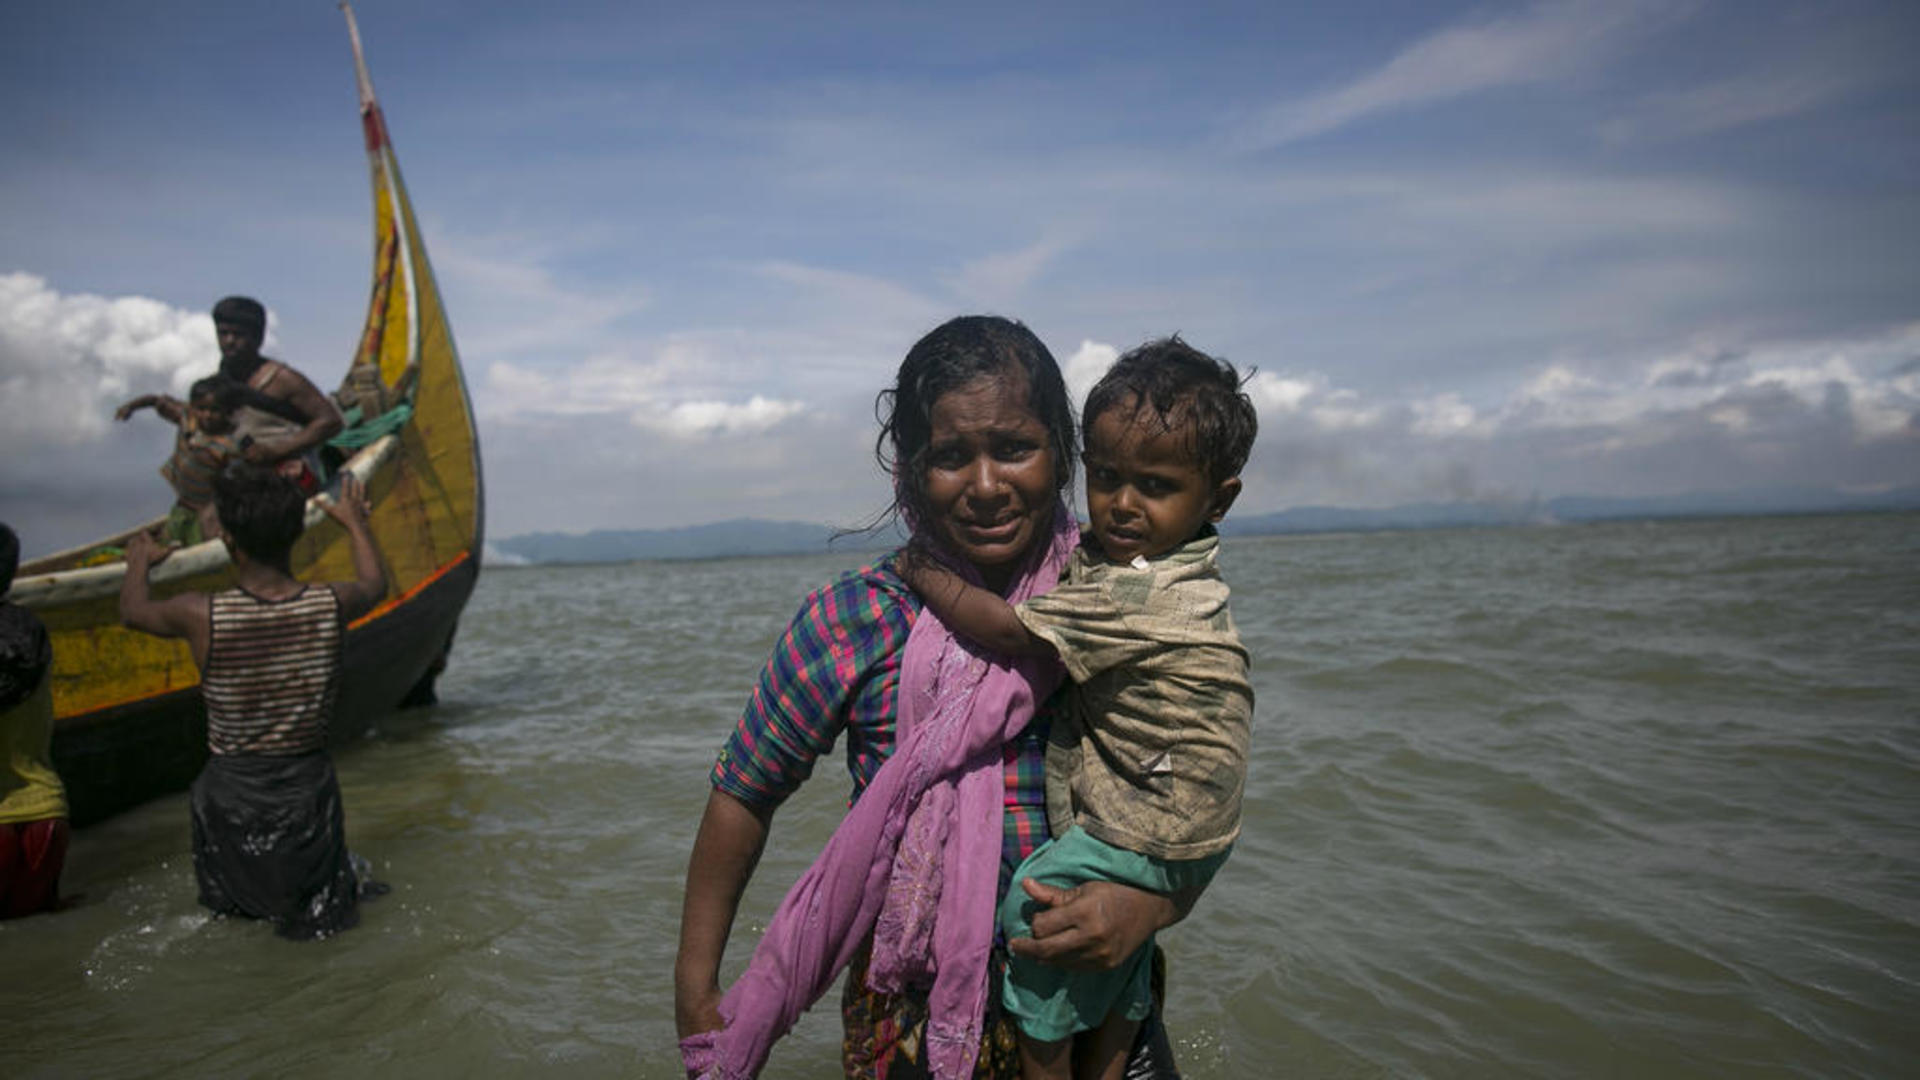 Rohingya refugee crisis: Violence displaces thousands in Myanmar's Rakhine State. International Rescue Committee (IRC)